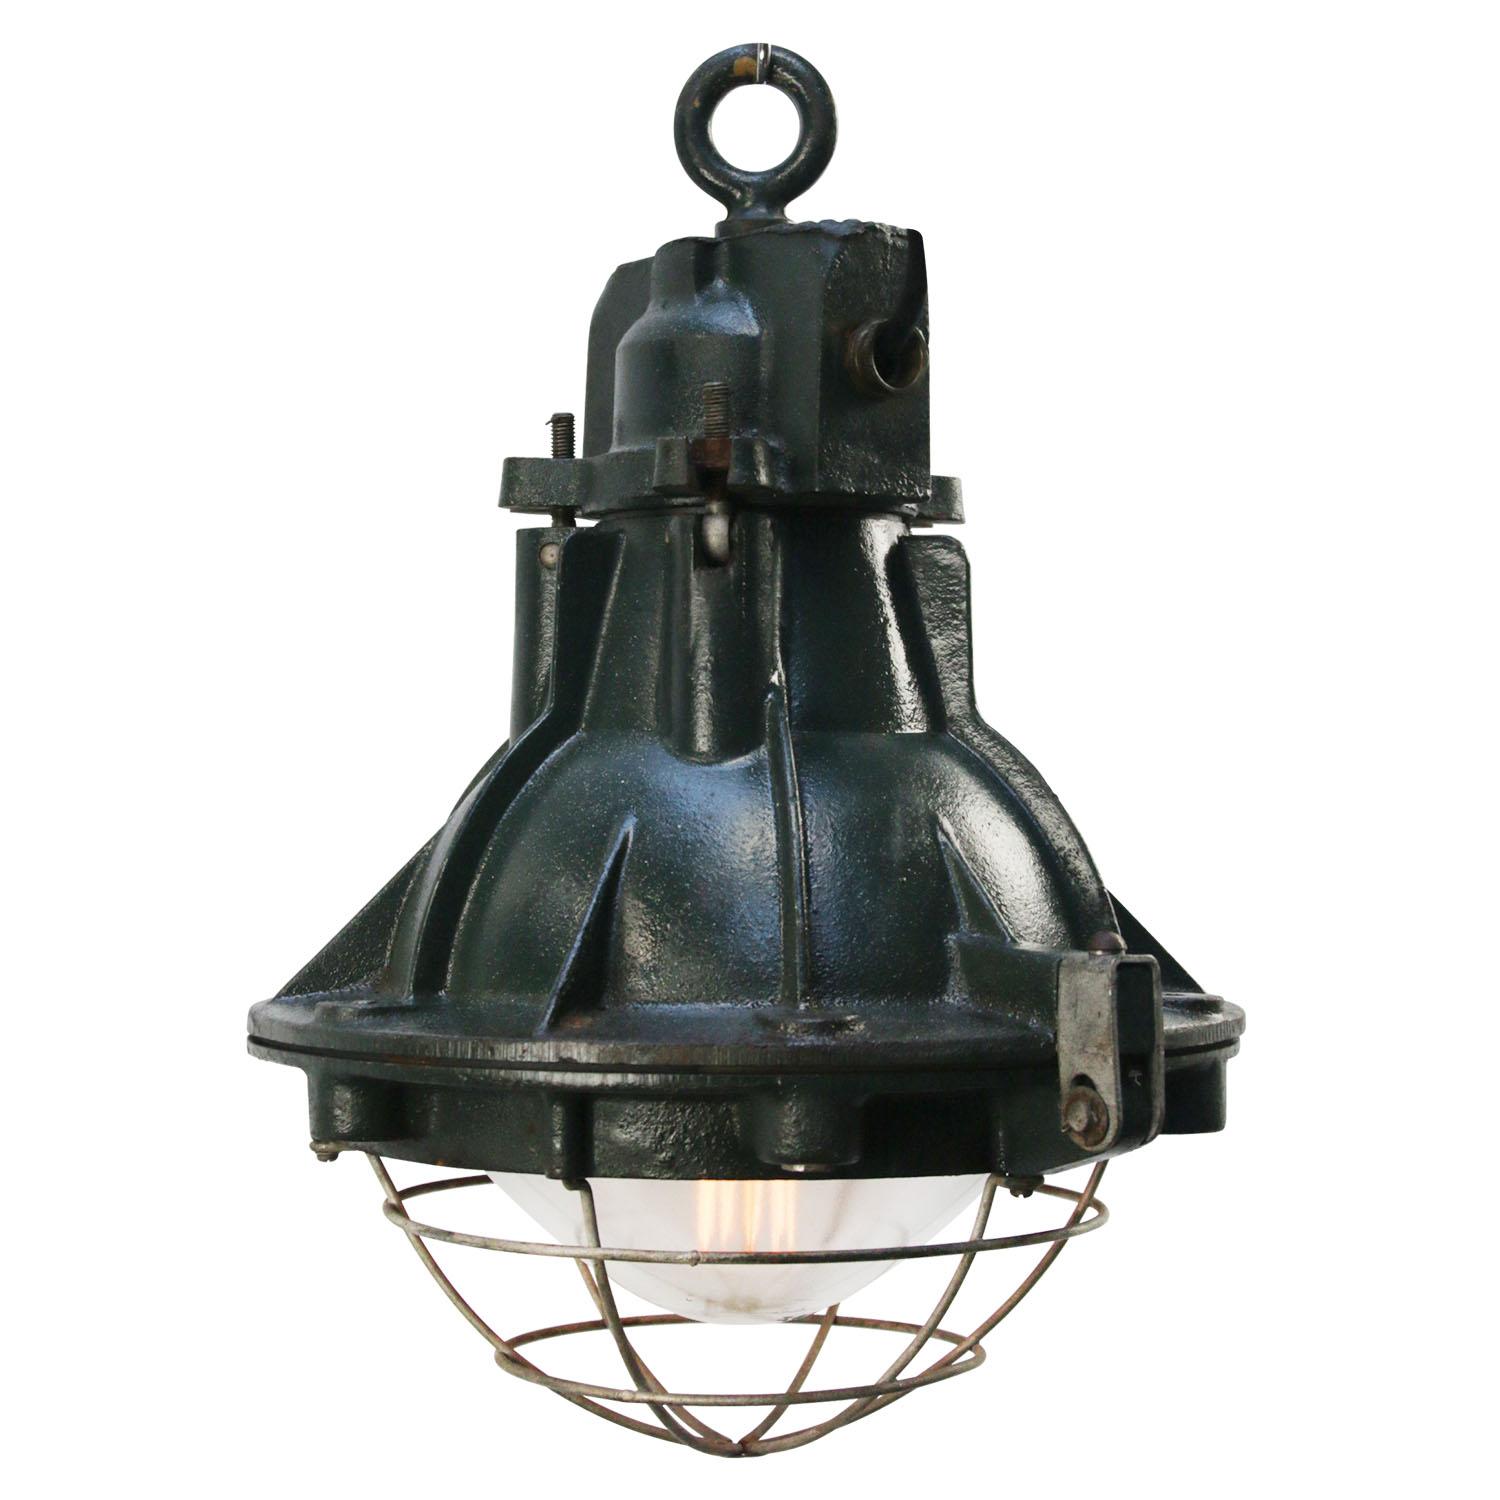 French factory pendant by Sammode, France
Green cast iron
Clear glass with cage

Weight: 13.70 kg / 30.2 lb

Priced per individual item. All lamps have been made suitable by international standards for incandescent light bulbs,